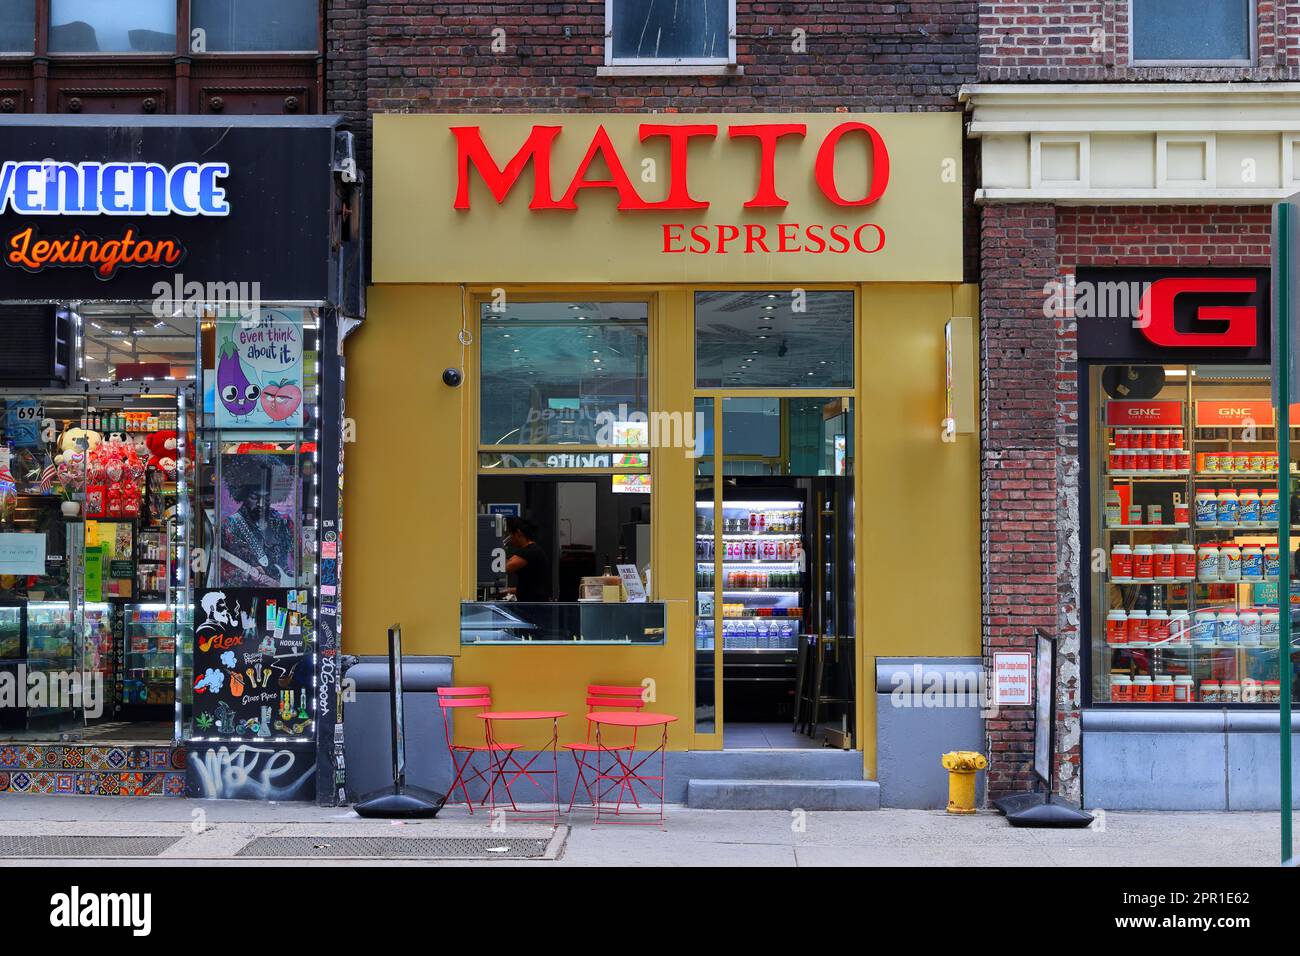 Matto Espresso, 696 Lexington Ave, New York, NYC storefront photo of a discount coffee shop chain in Midtown Manhattan. Stock Photo